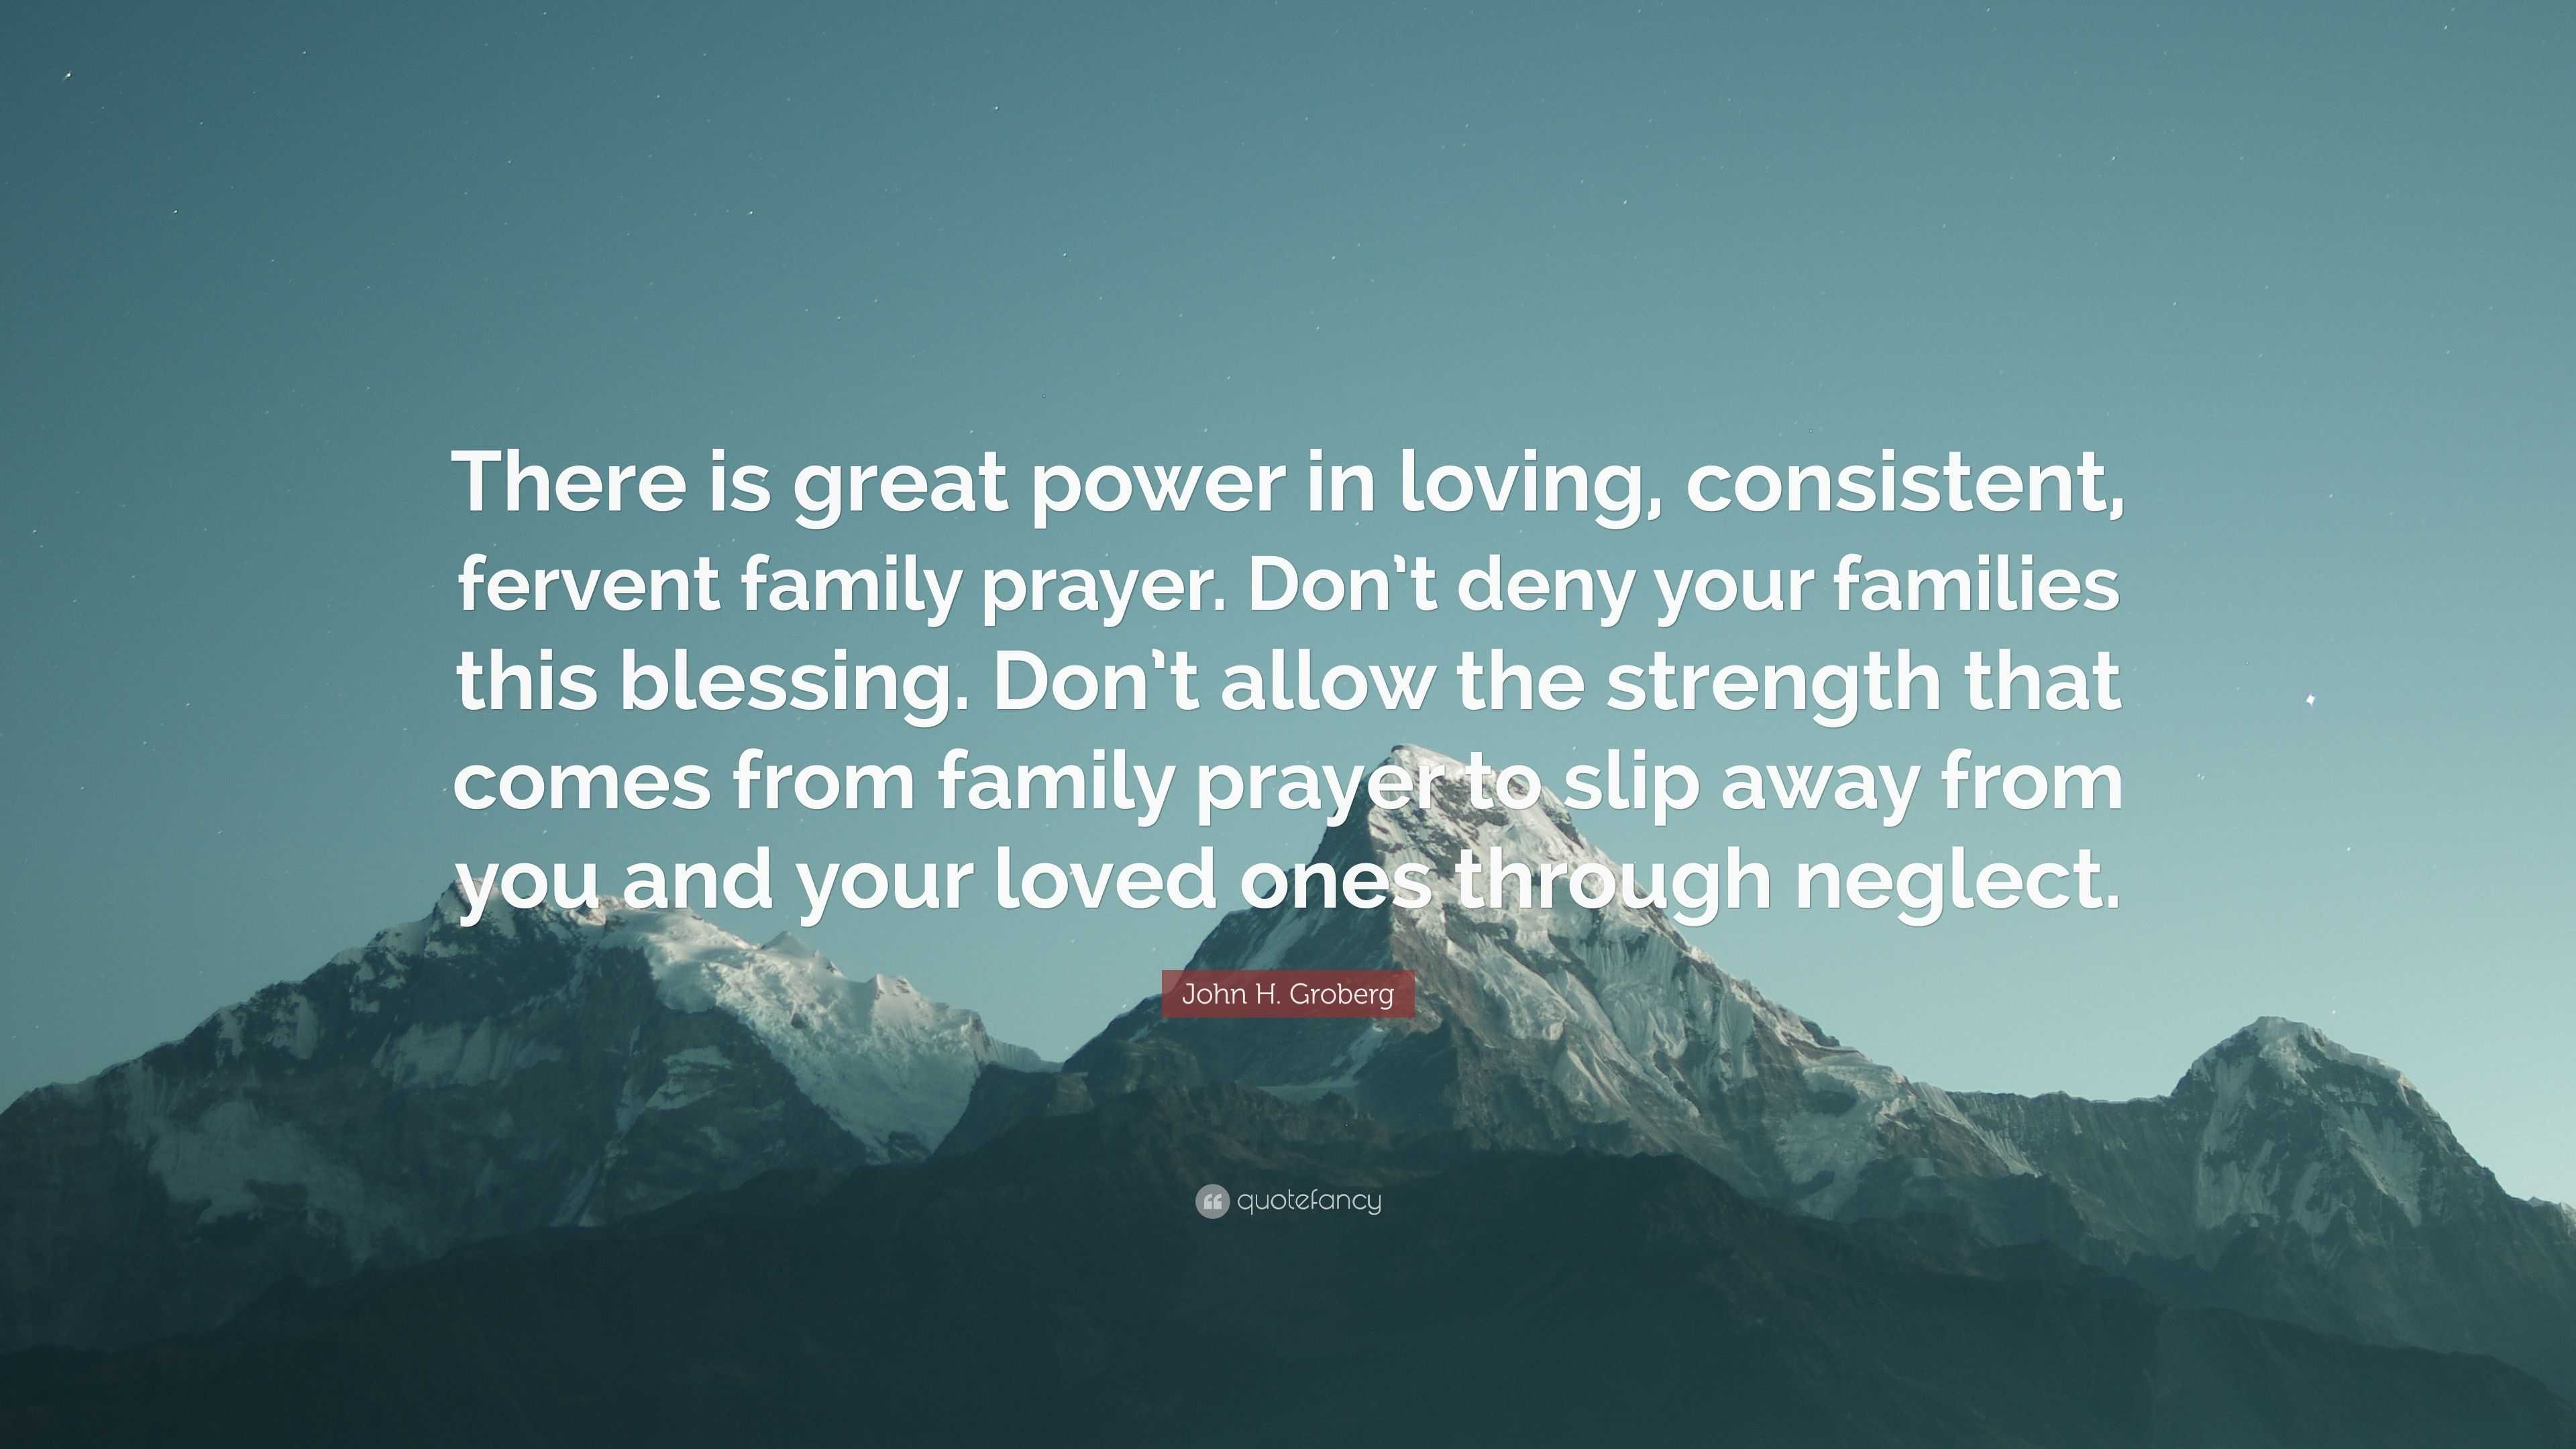 John H Groberg Quote “There is great power in loving consistent